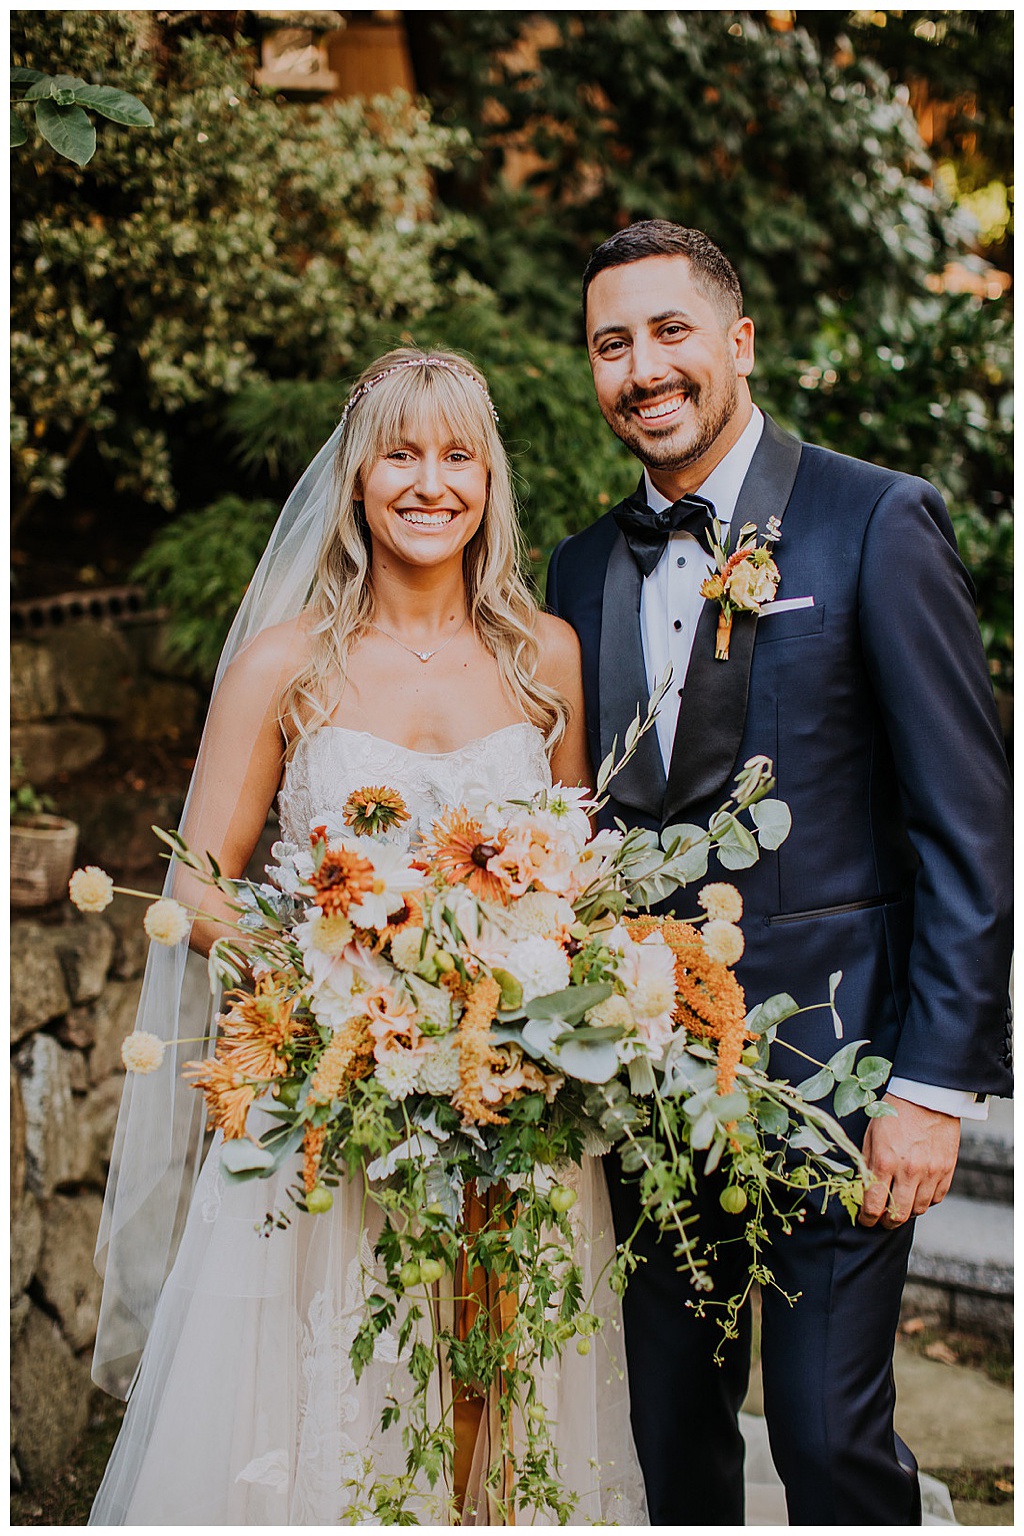 The couple smiling and holding the cascading bouquet